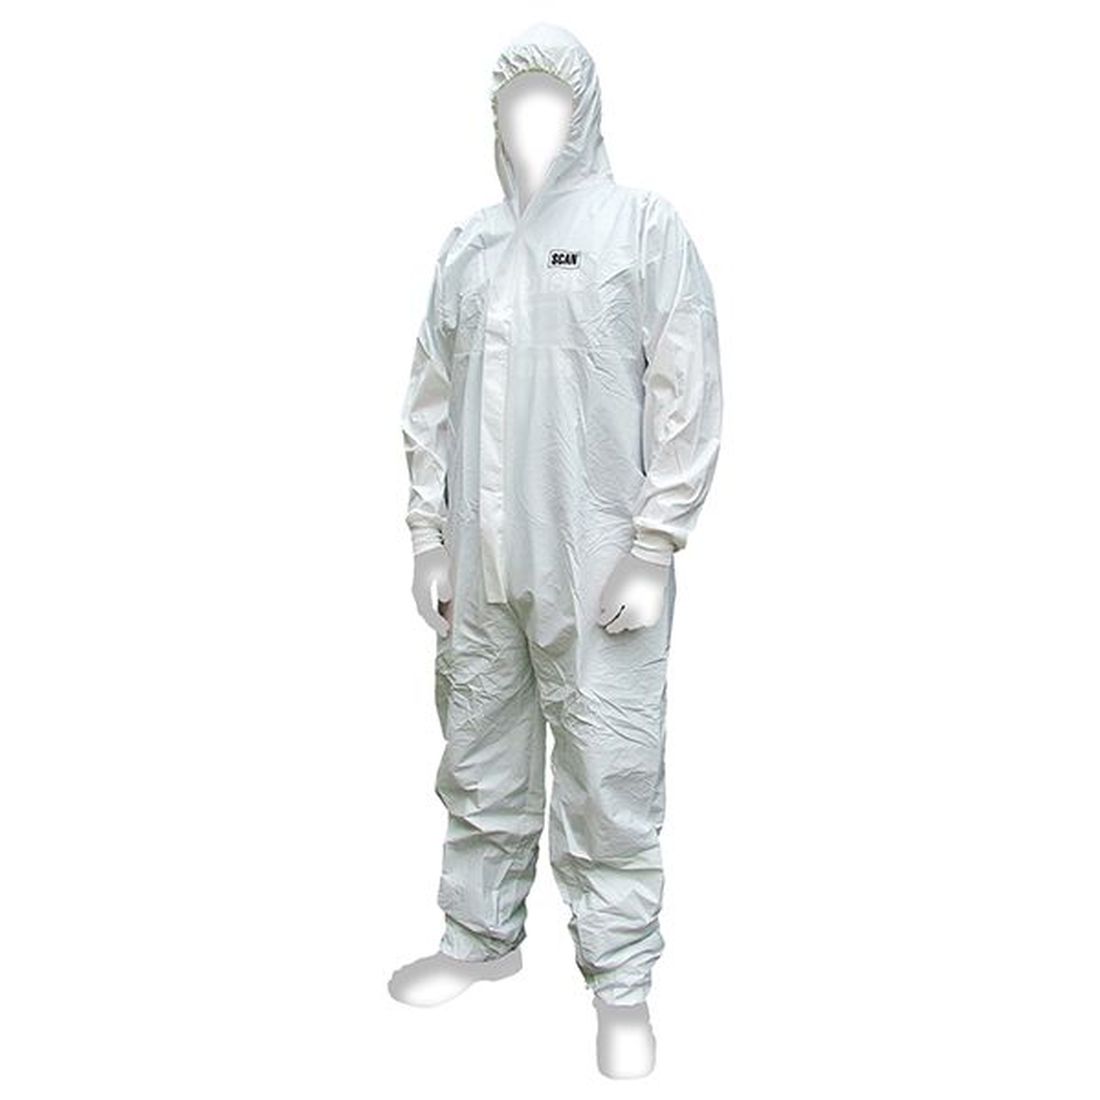 Scan Chemical Splash Resistant Disposable Coverall White Type 5/6 L (39-42in)        